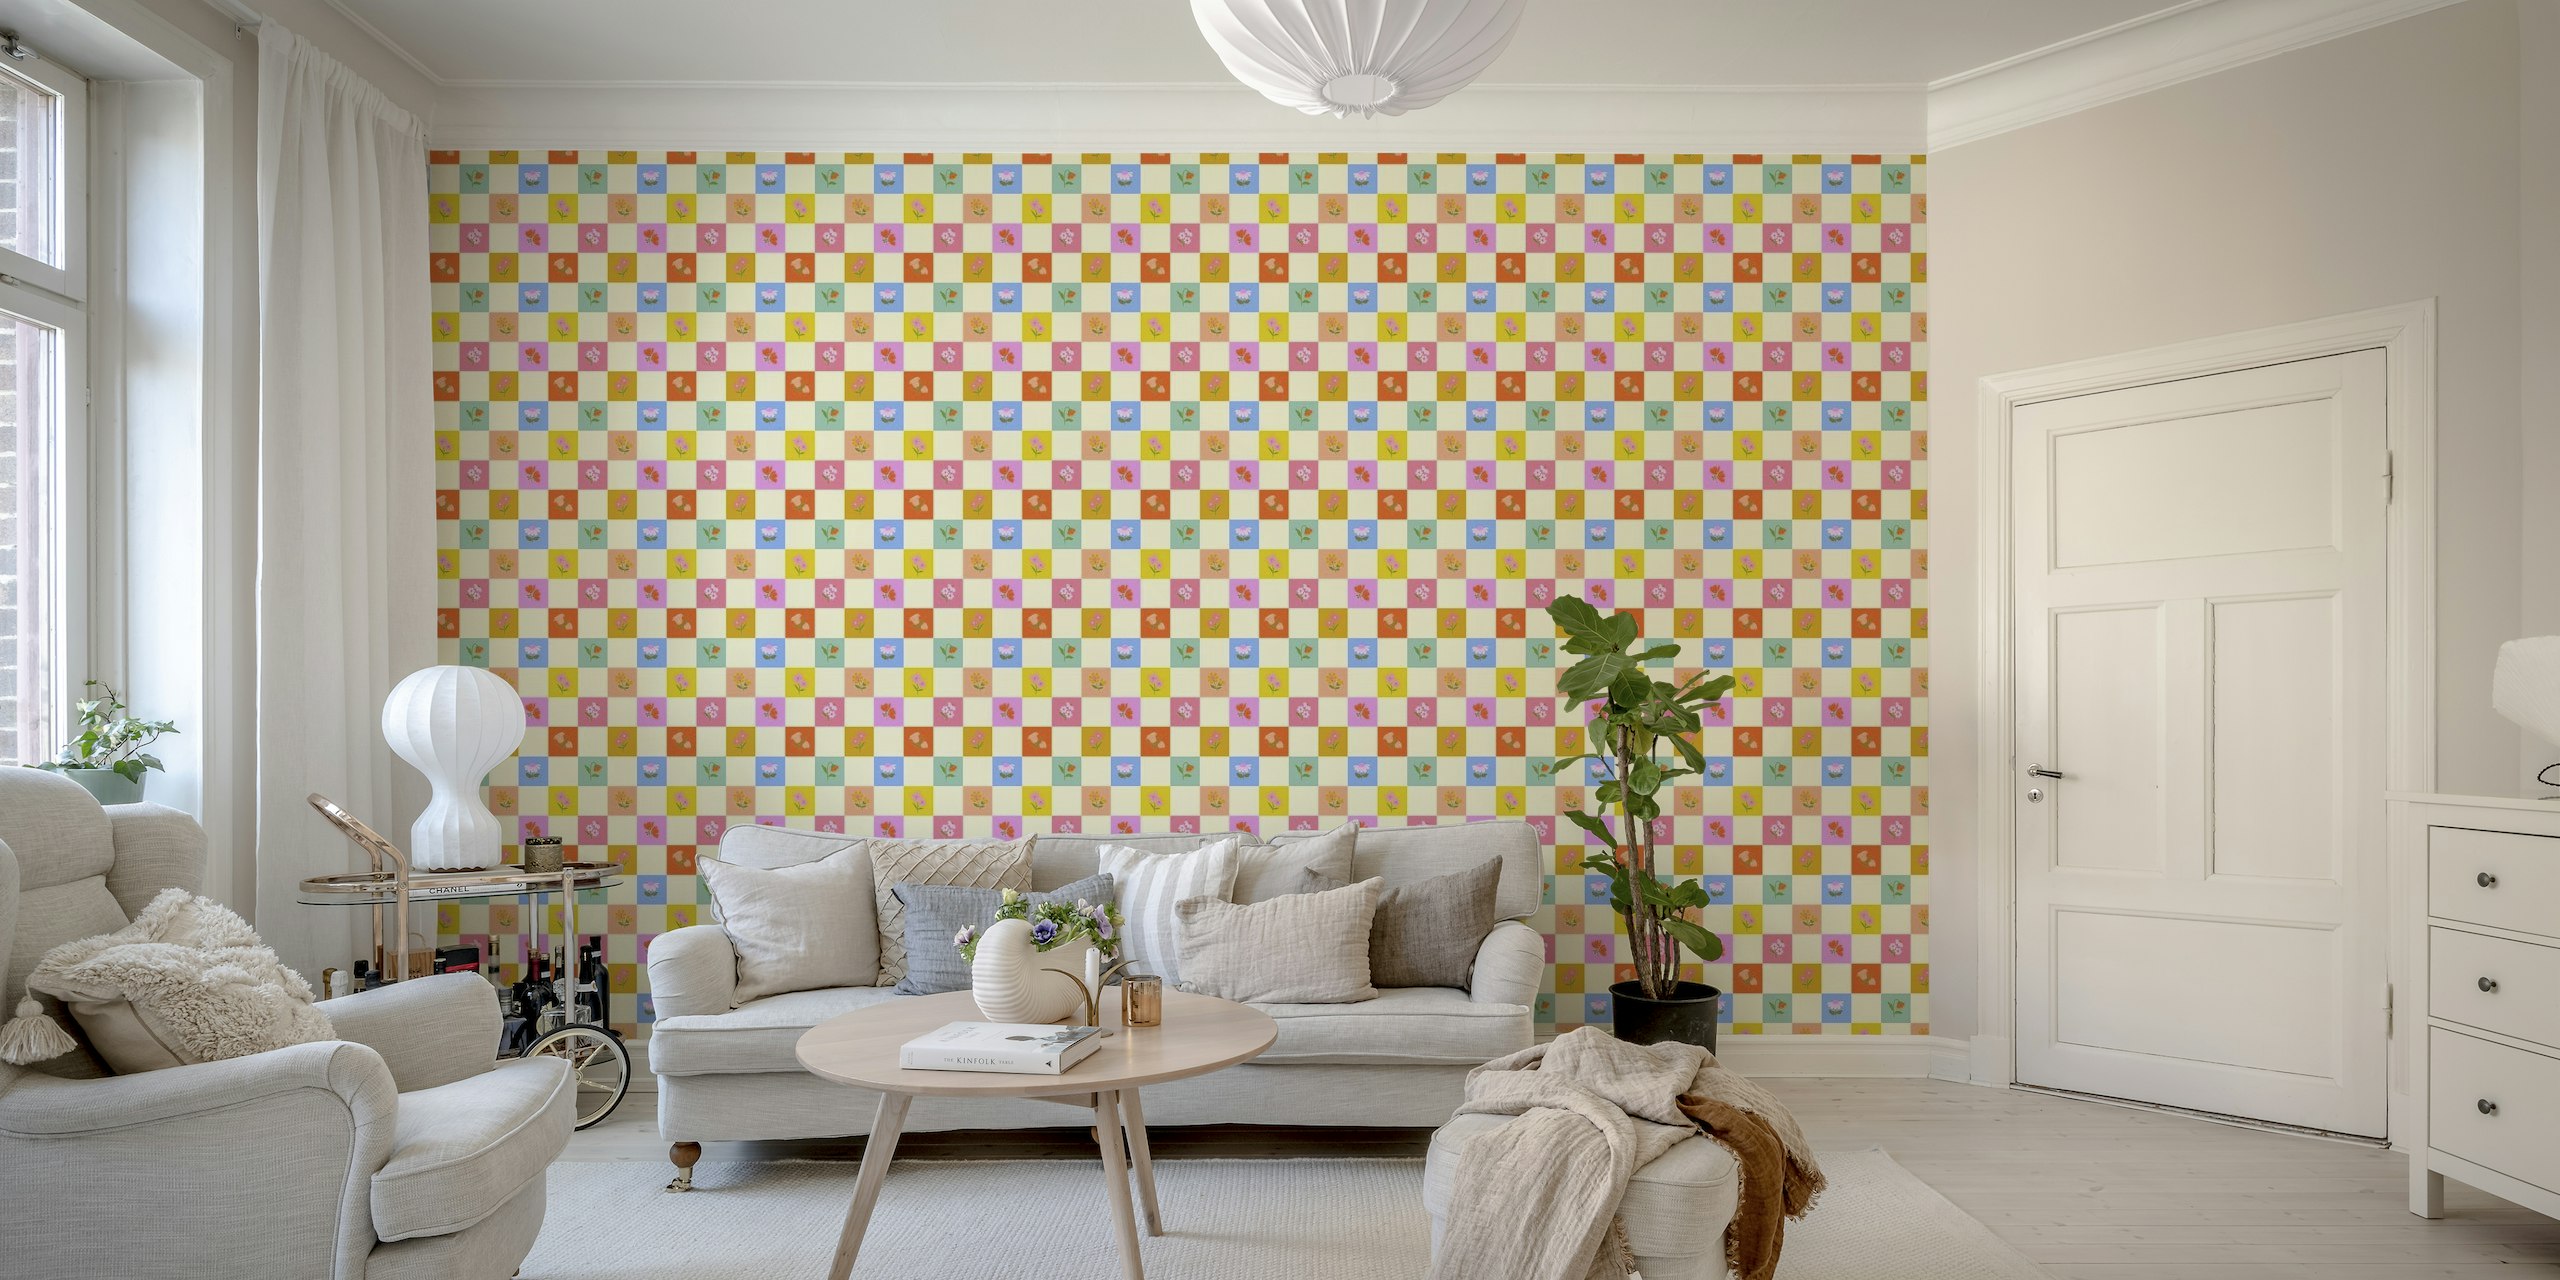 Checkered Floral Pattern behang